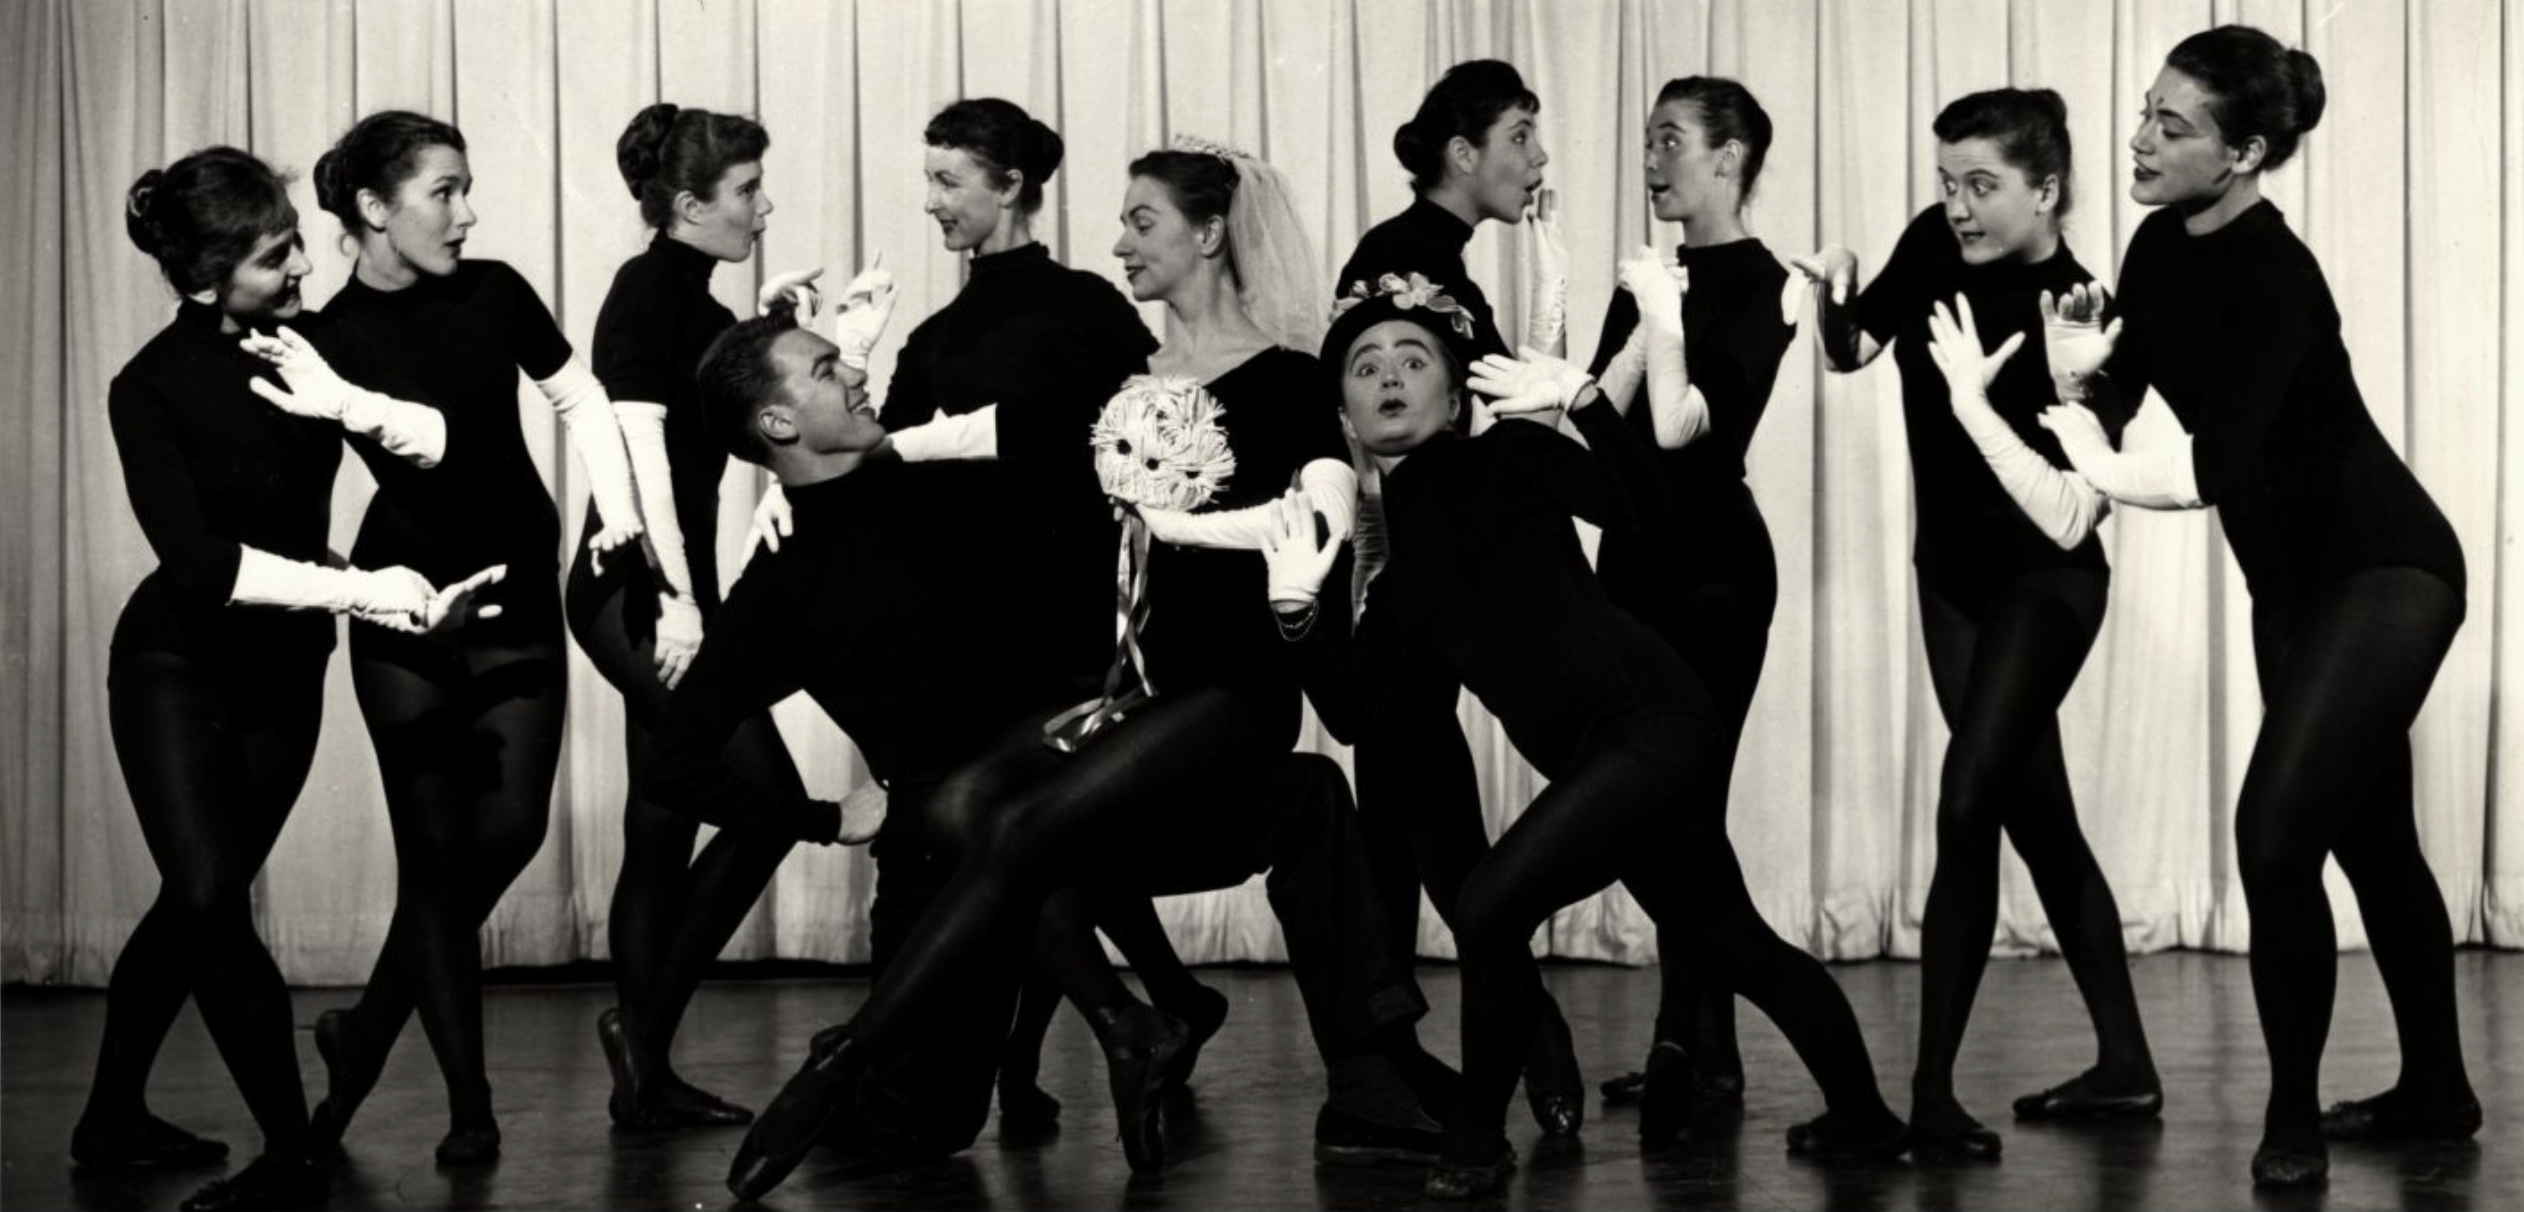 A group of dancers all wearing black clothing and white gloves.